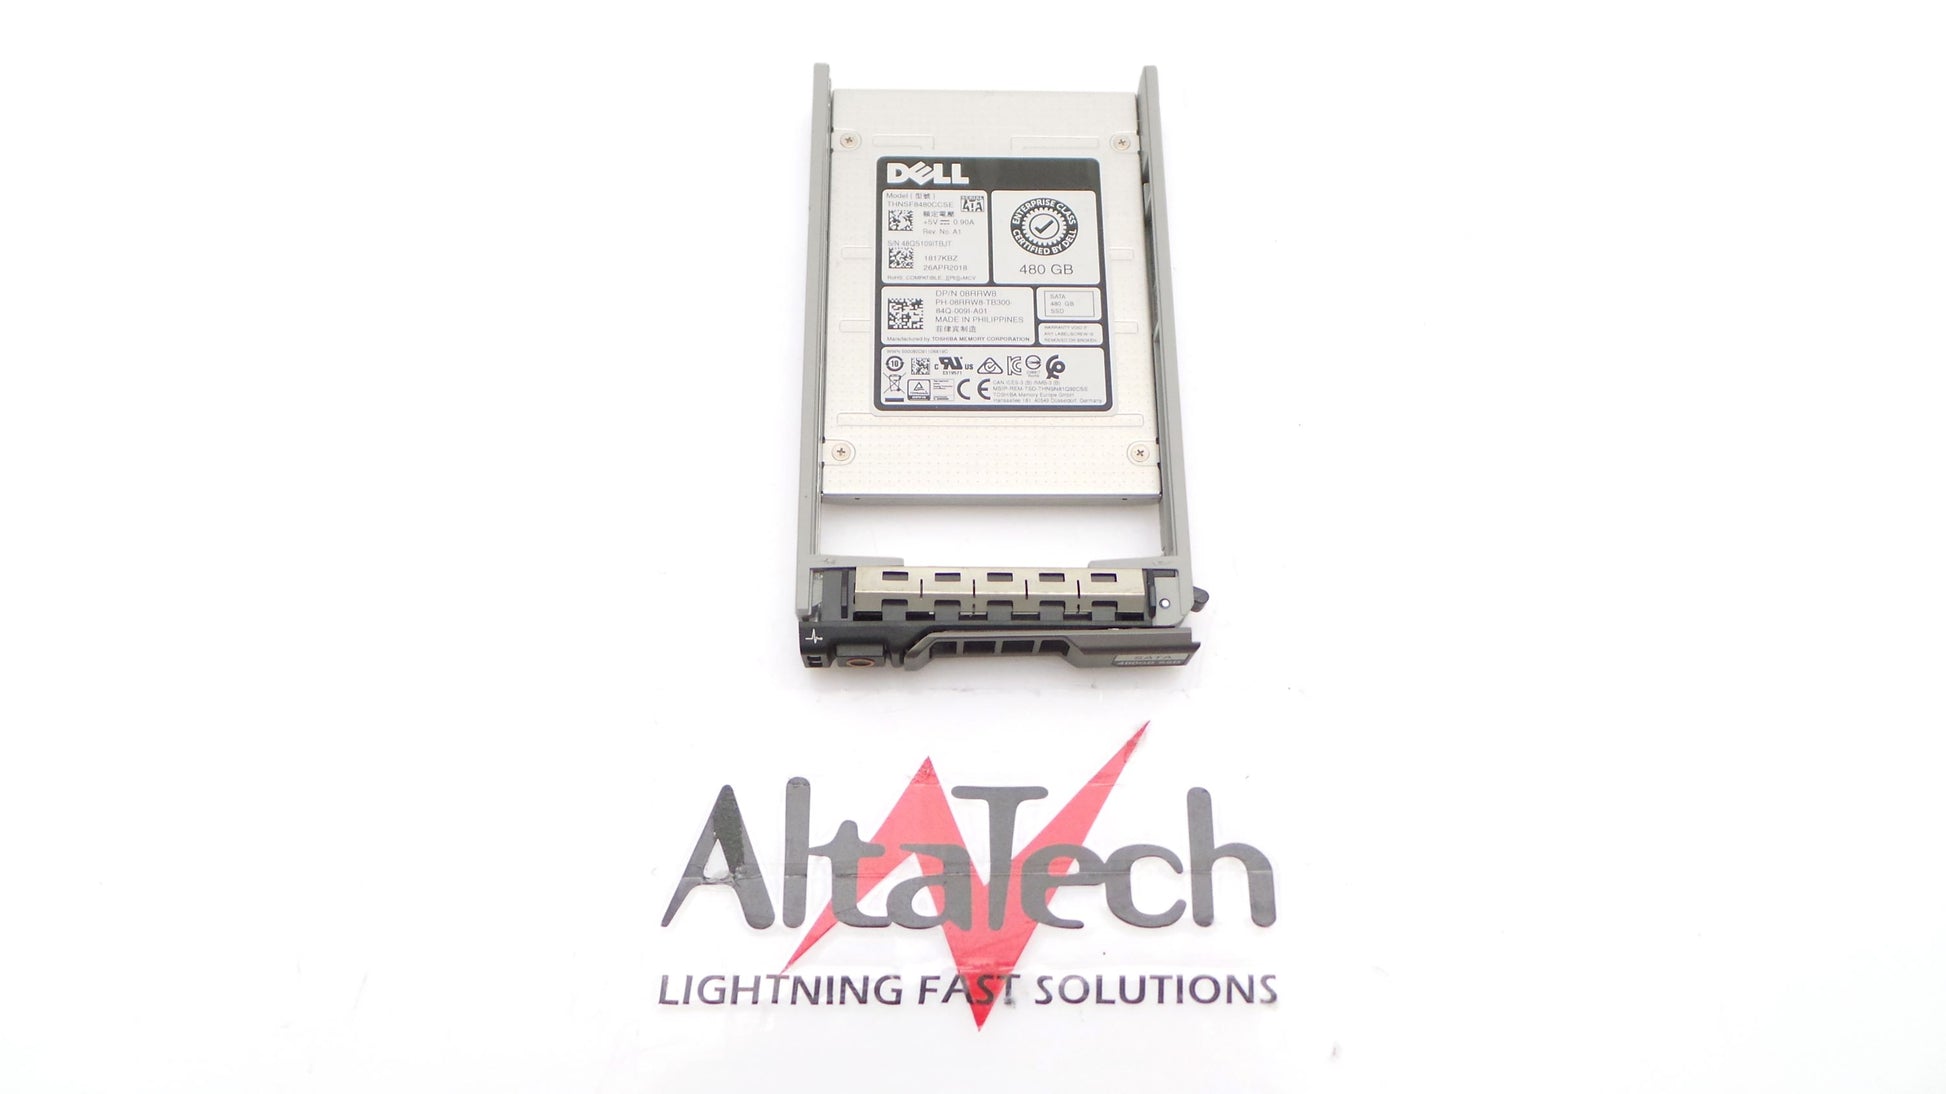 Toshiba THNSF8480CCSE Dell 8RRW8 480GB SSD SATA 2.5" 6G MU Mixed Use THNSF8480CCSE Solid State Drive, Used